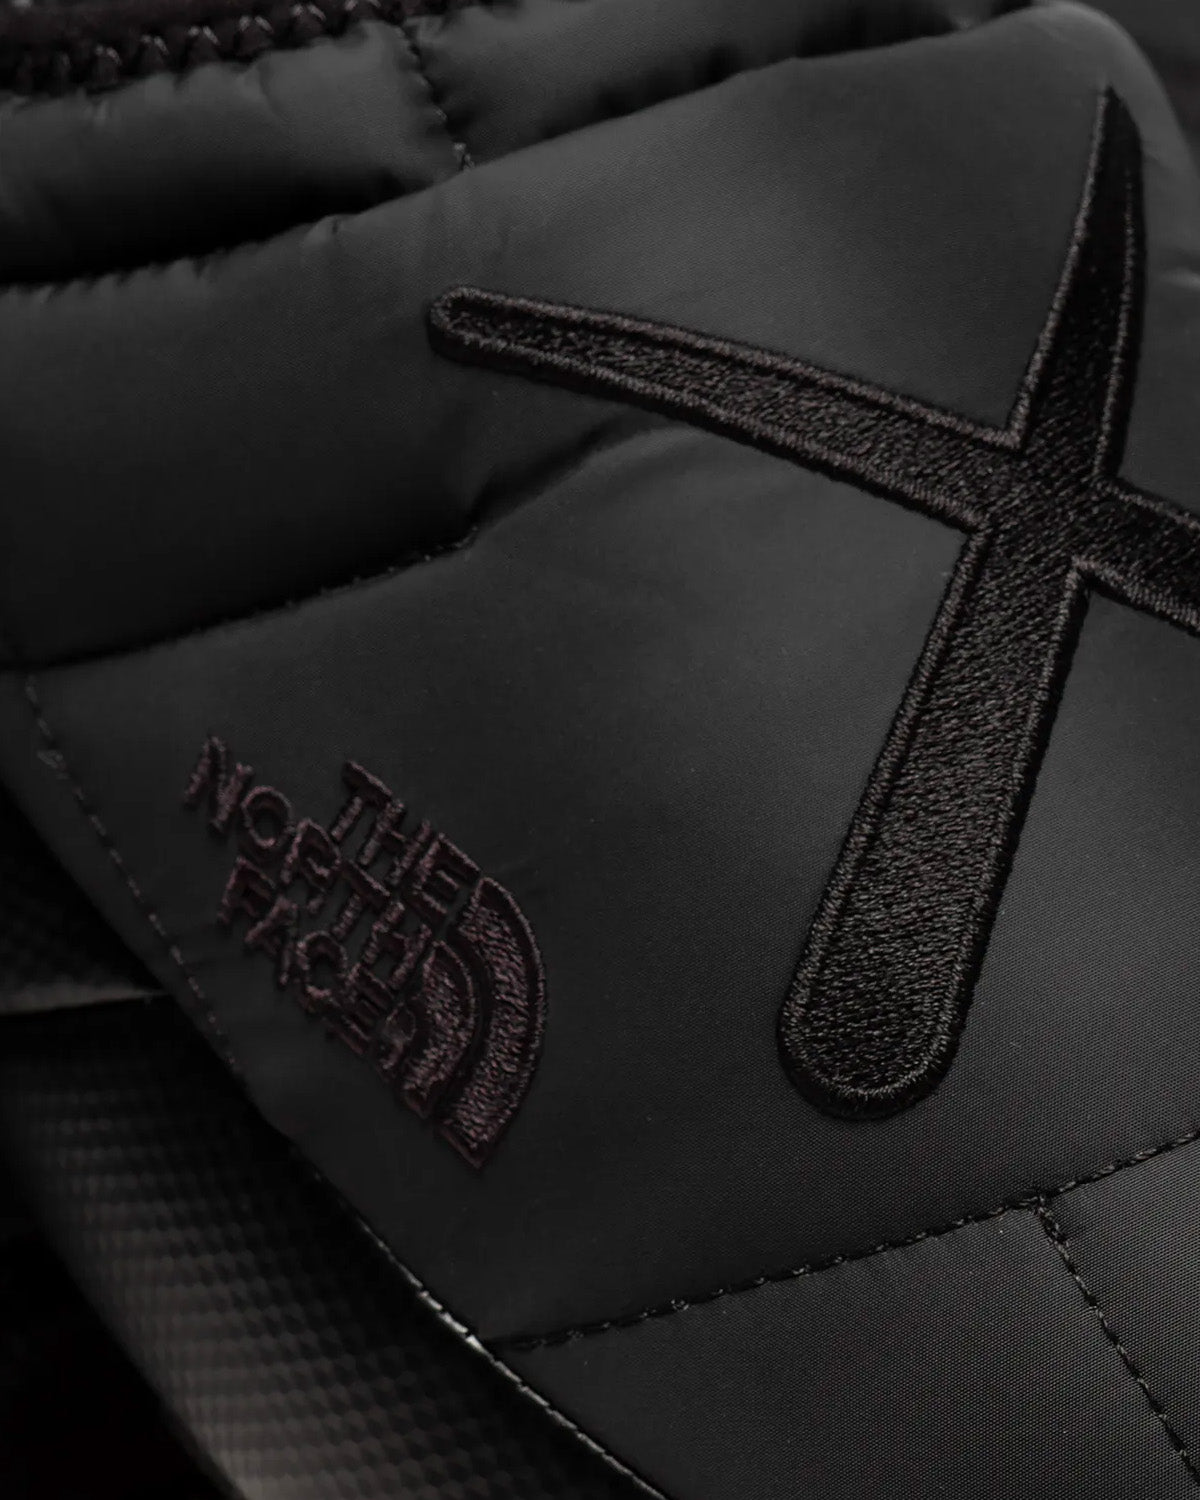 The North Face x KAWS - Thermoball Traction Mule V Black Slip Ons